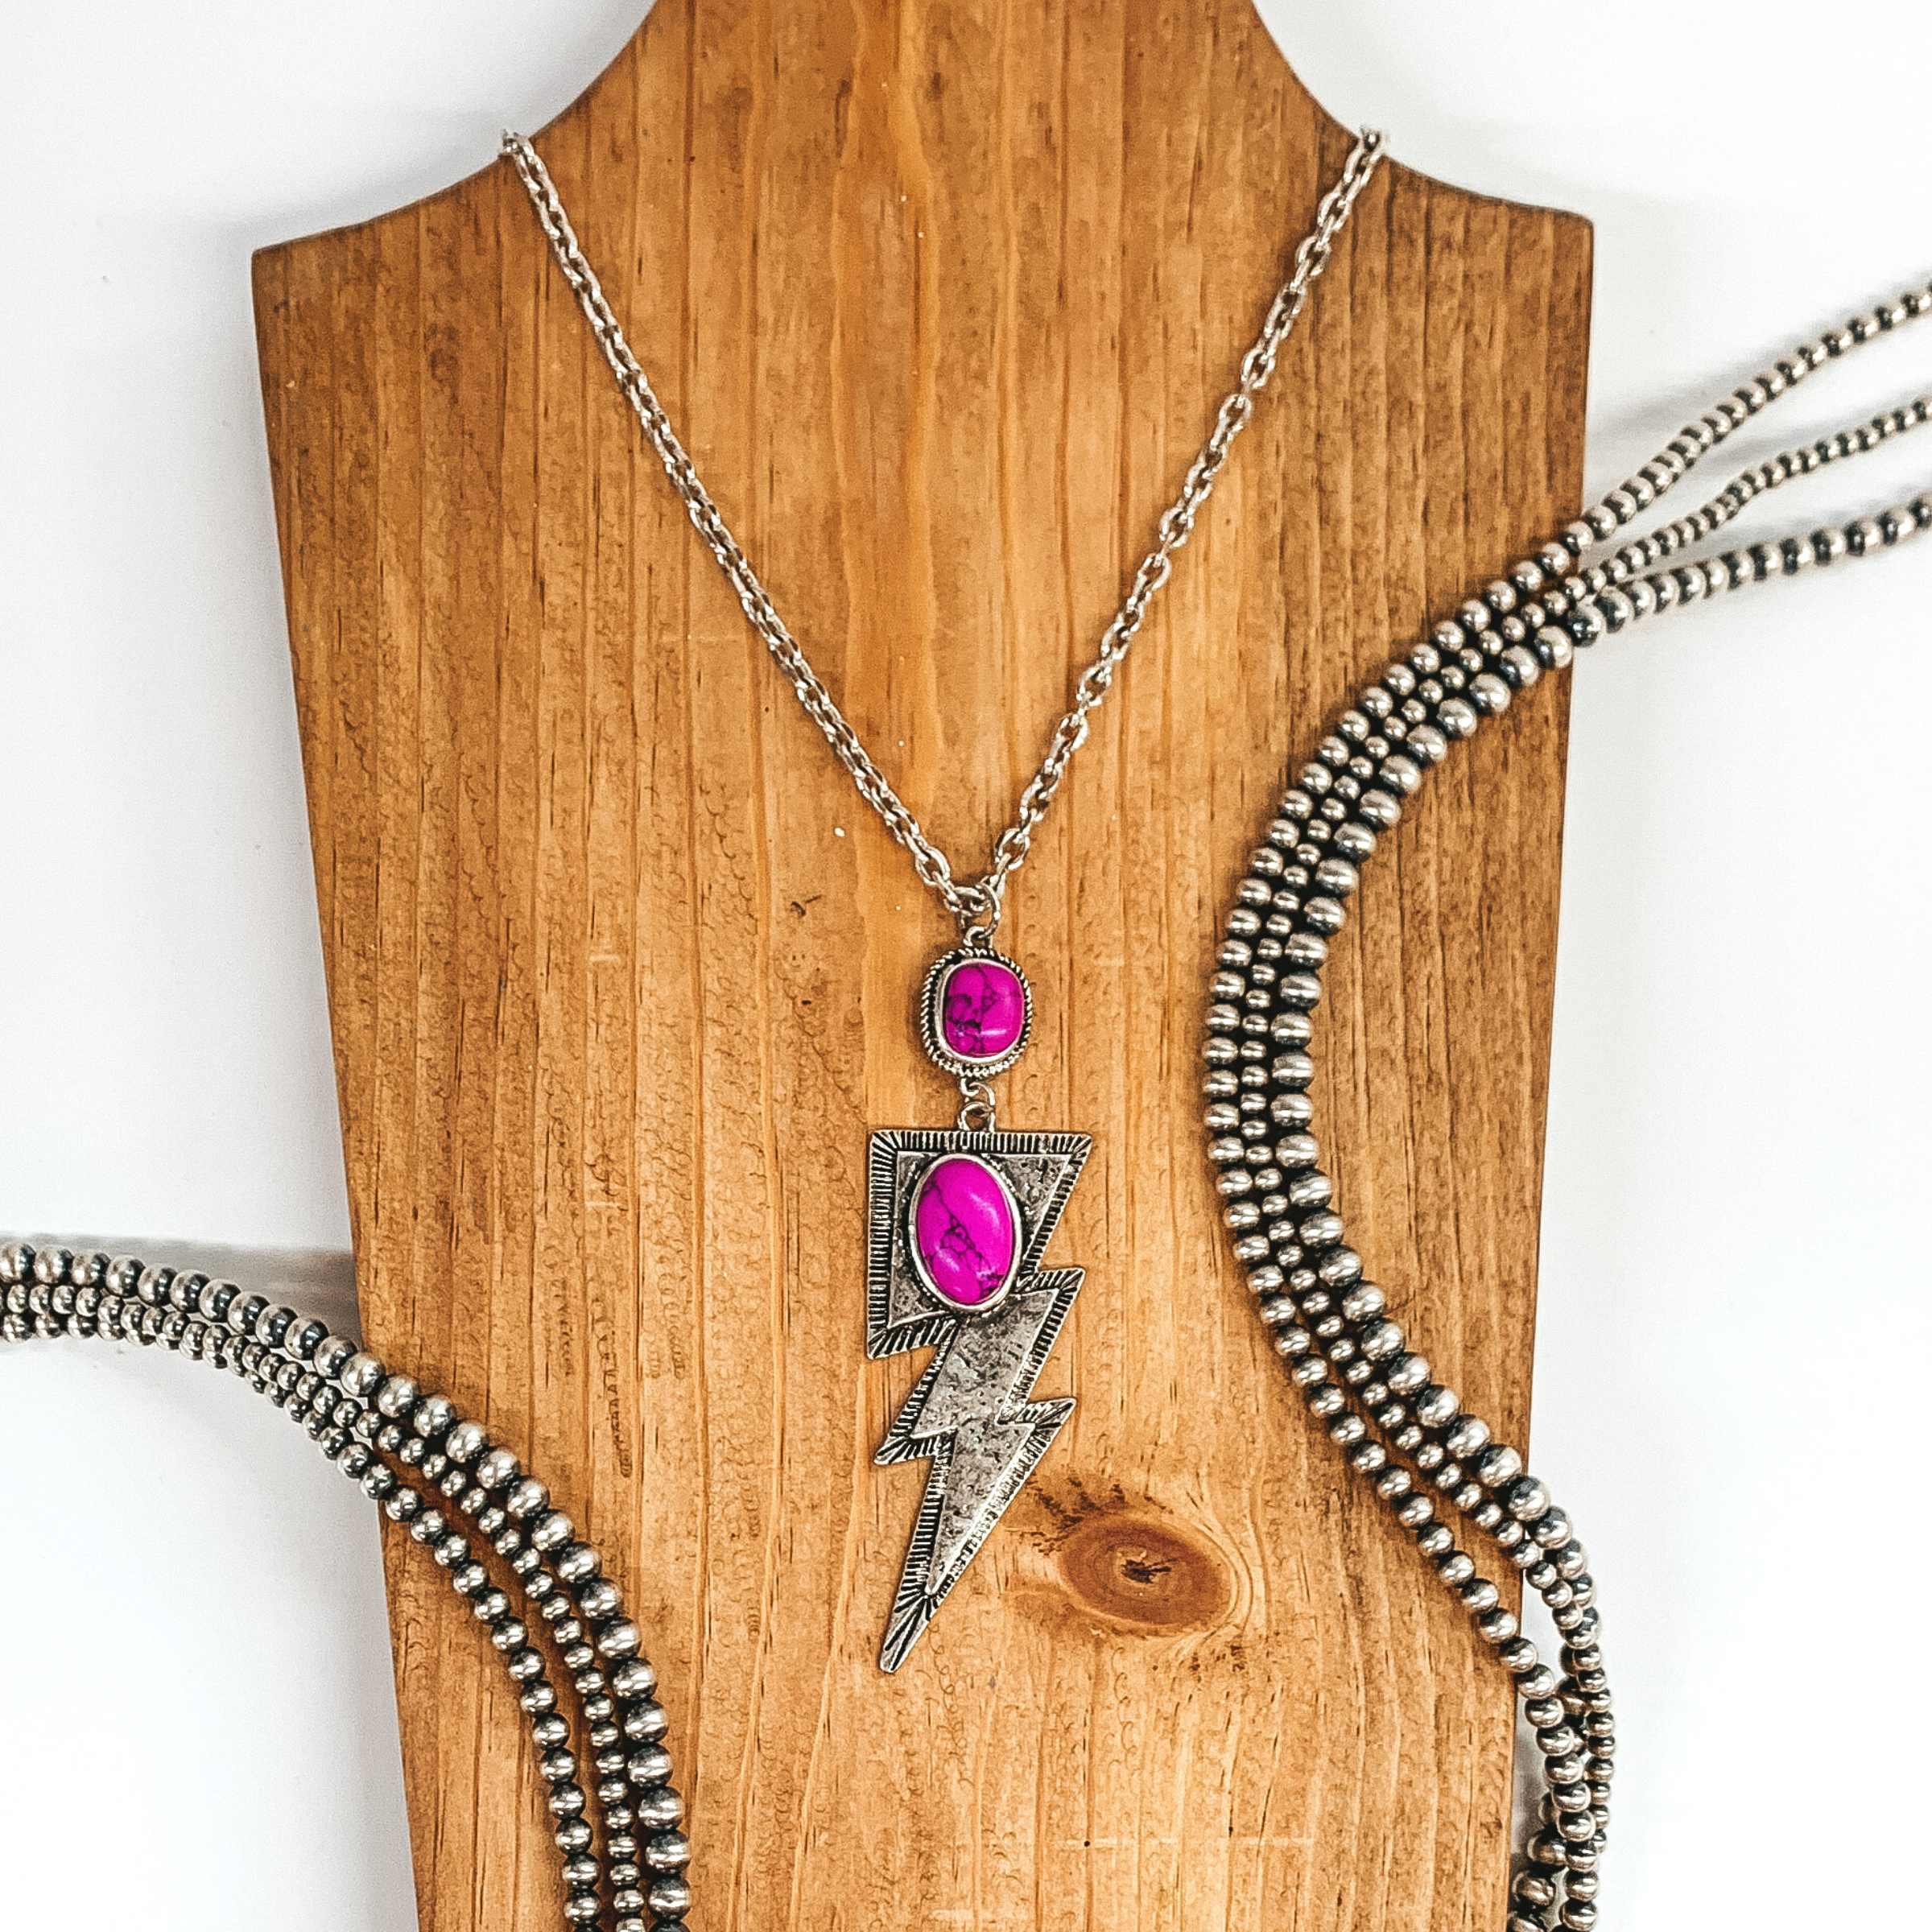 Silver chained necklace with hanging square pendant with fuchsia stone and hanging silver lightning bolt pendant with oval fuchsia colored stone. This necklace is pictured laying on a tan necklace holder on a white background. This picture includes silver beads as decoration.